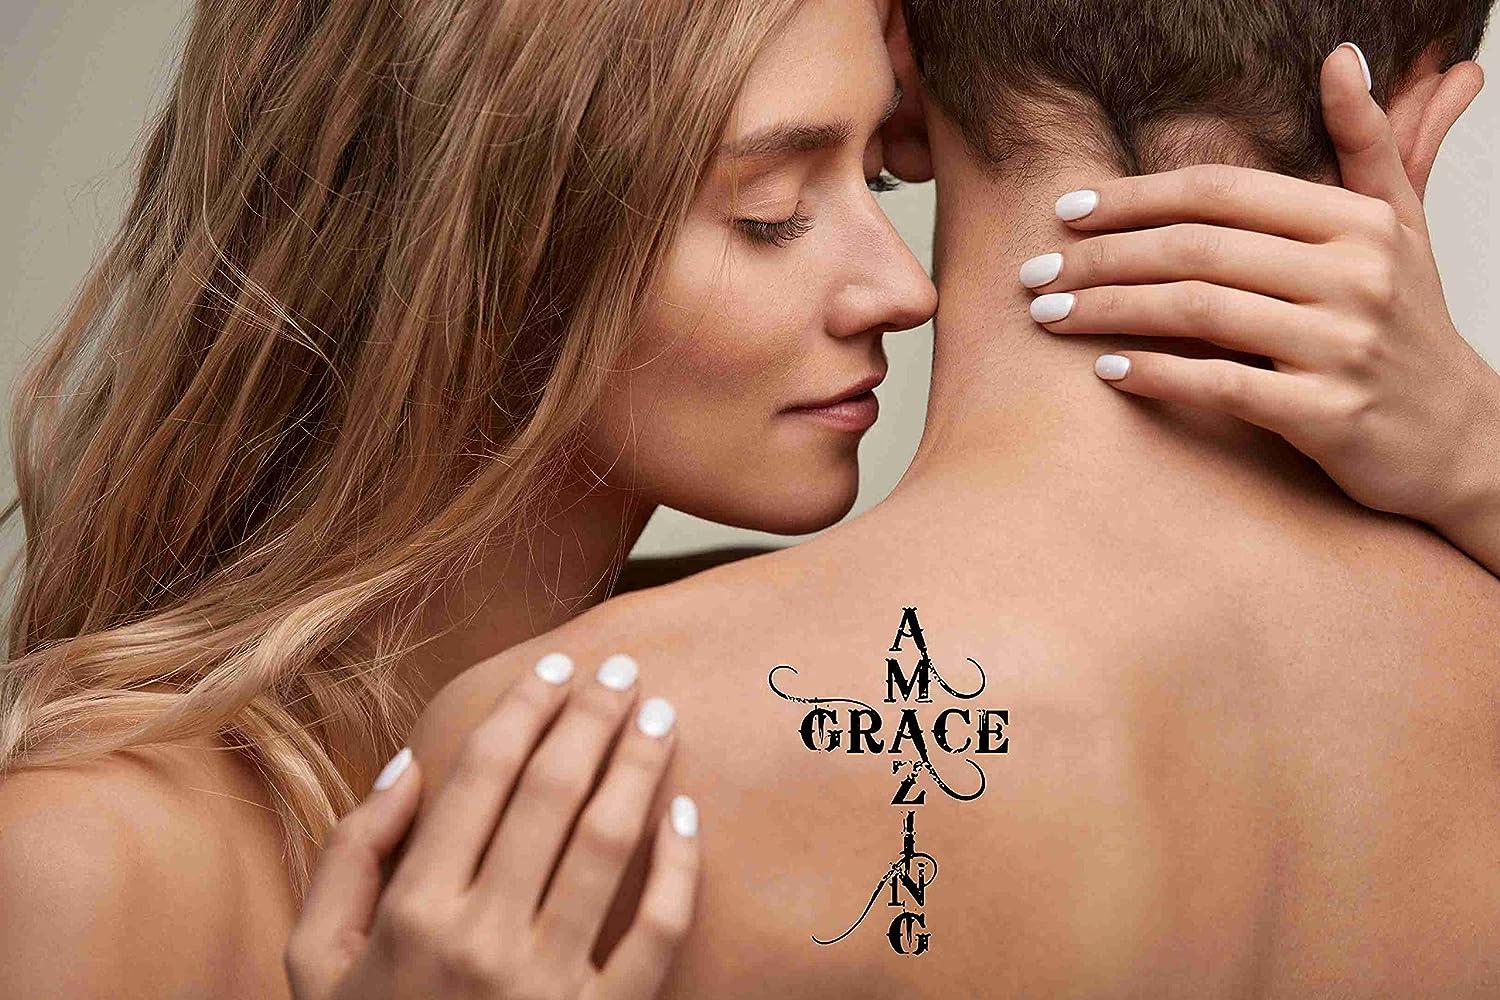 101 Best Grace Tattoo Ideas You Have To See To Believe!